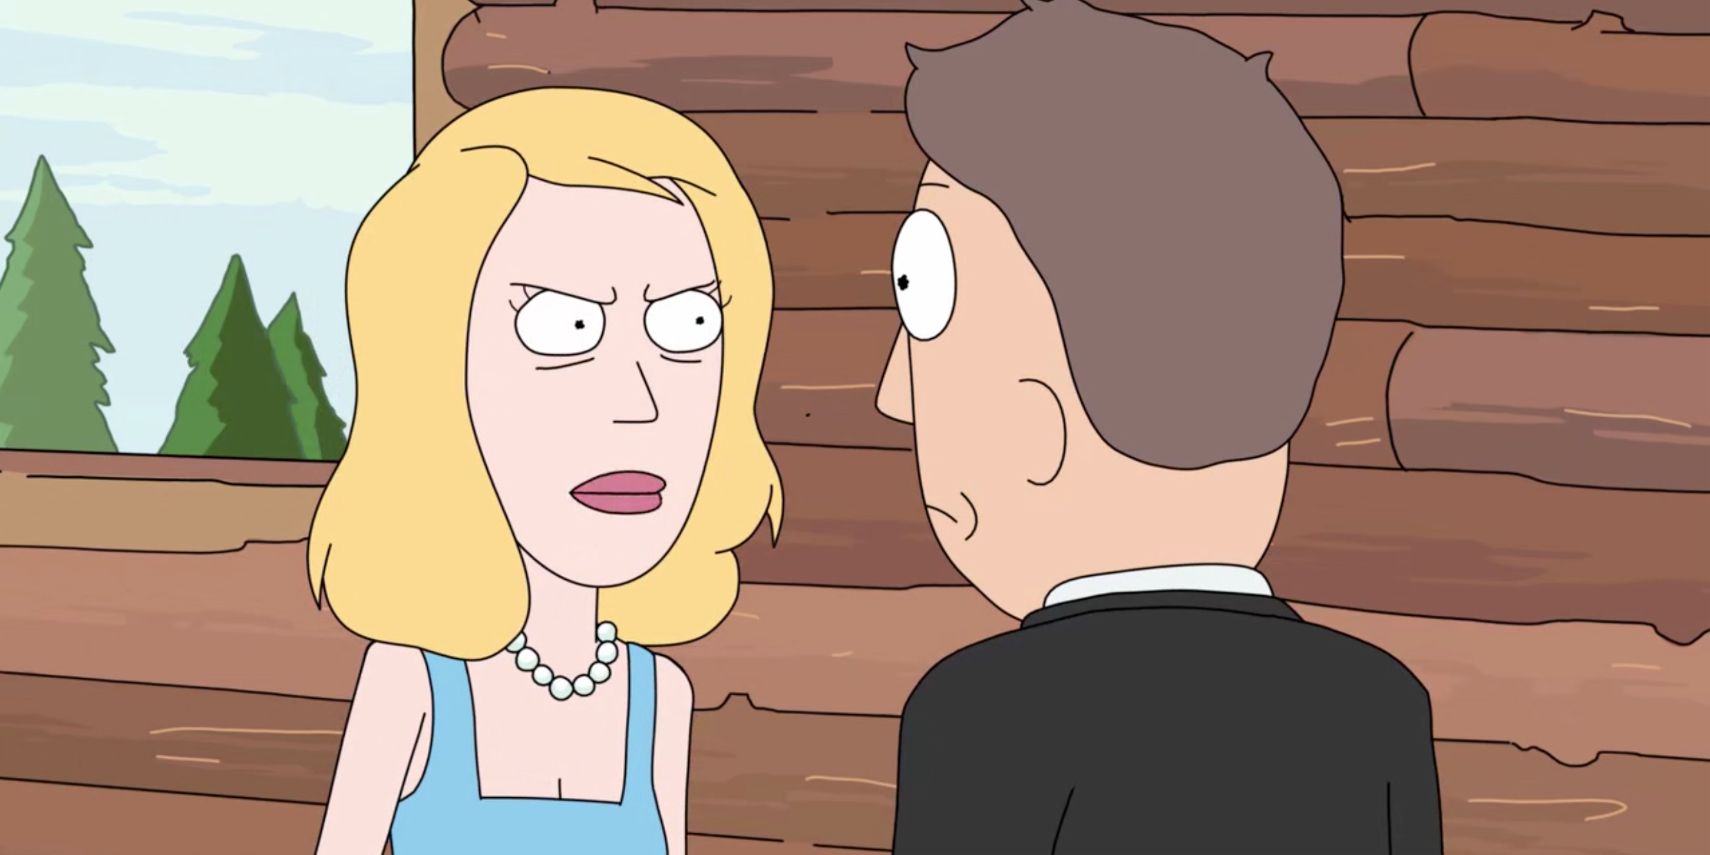 Beth looking disheveled yelling at Jerry in Rick and Morty